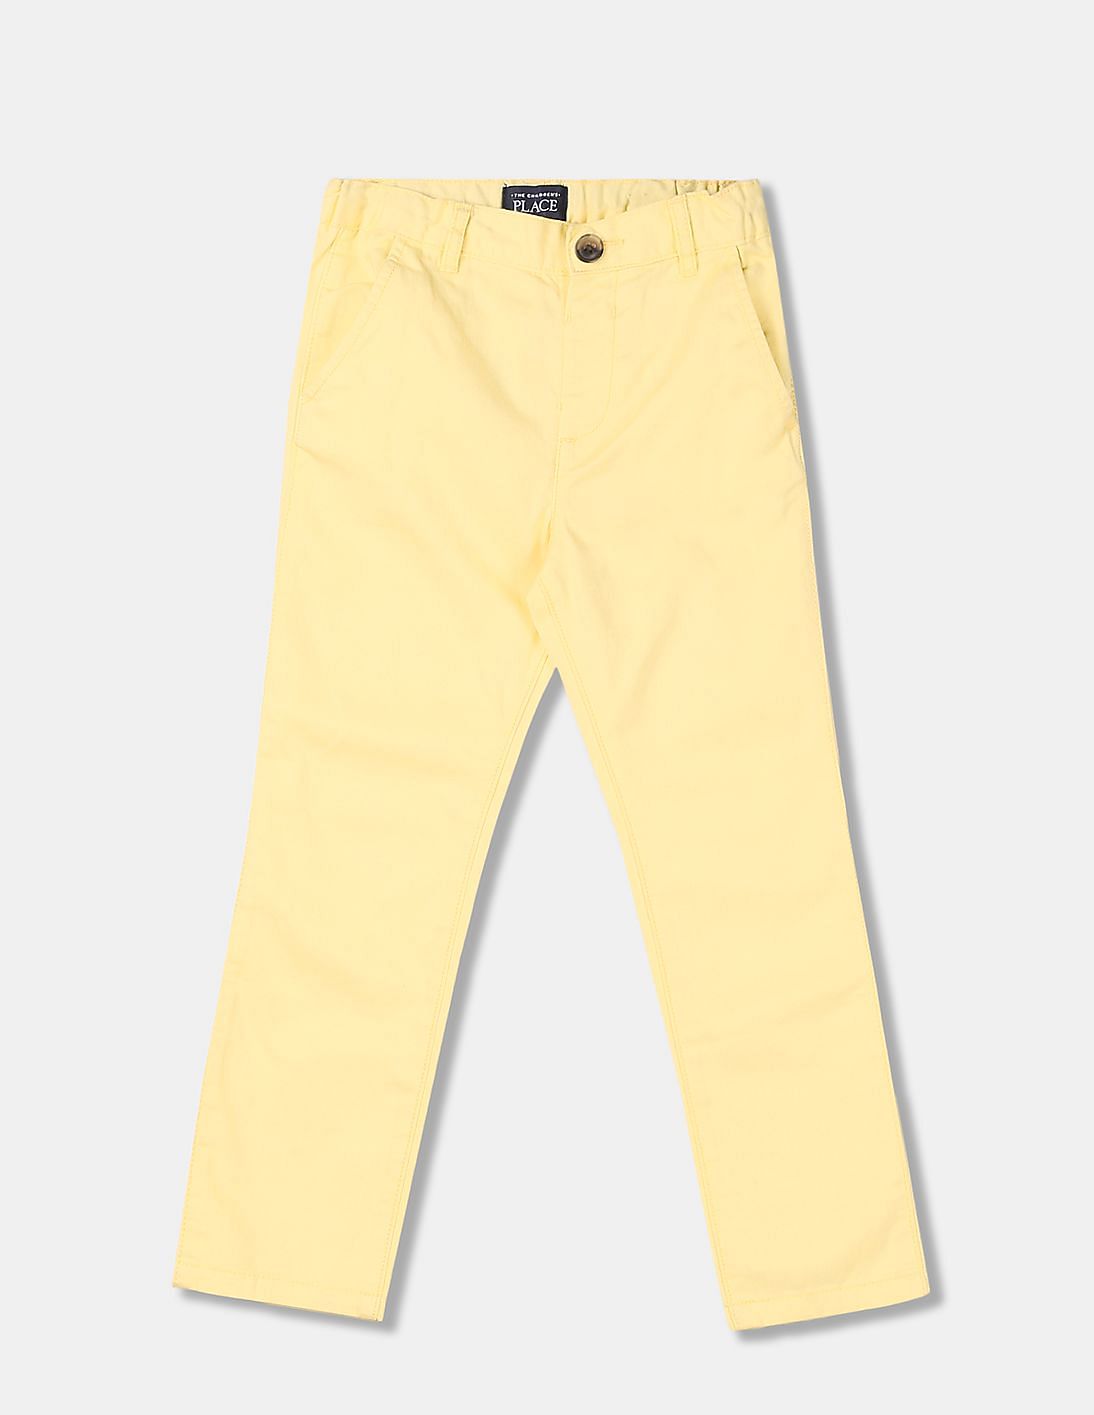 Buy The Children's Place Toddler Boy Yellow Skinny Chino Pants - NNNOW.com